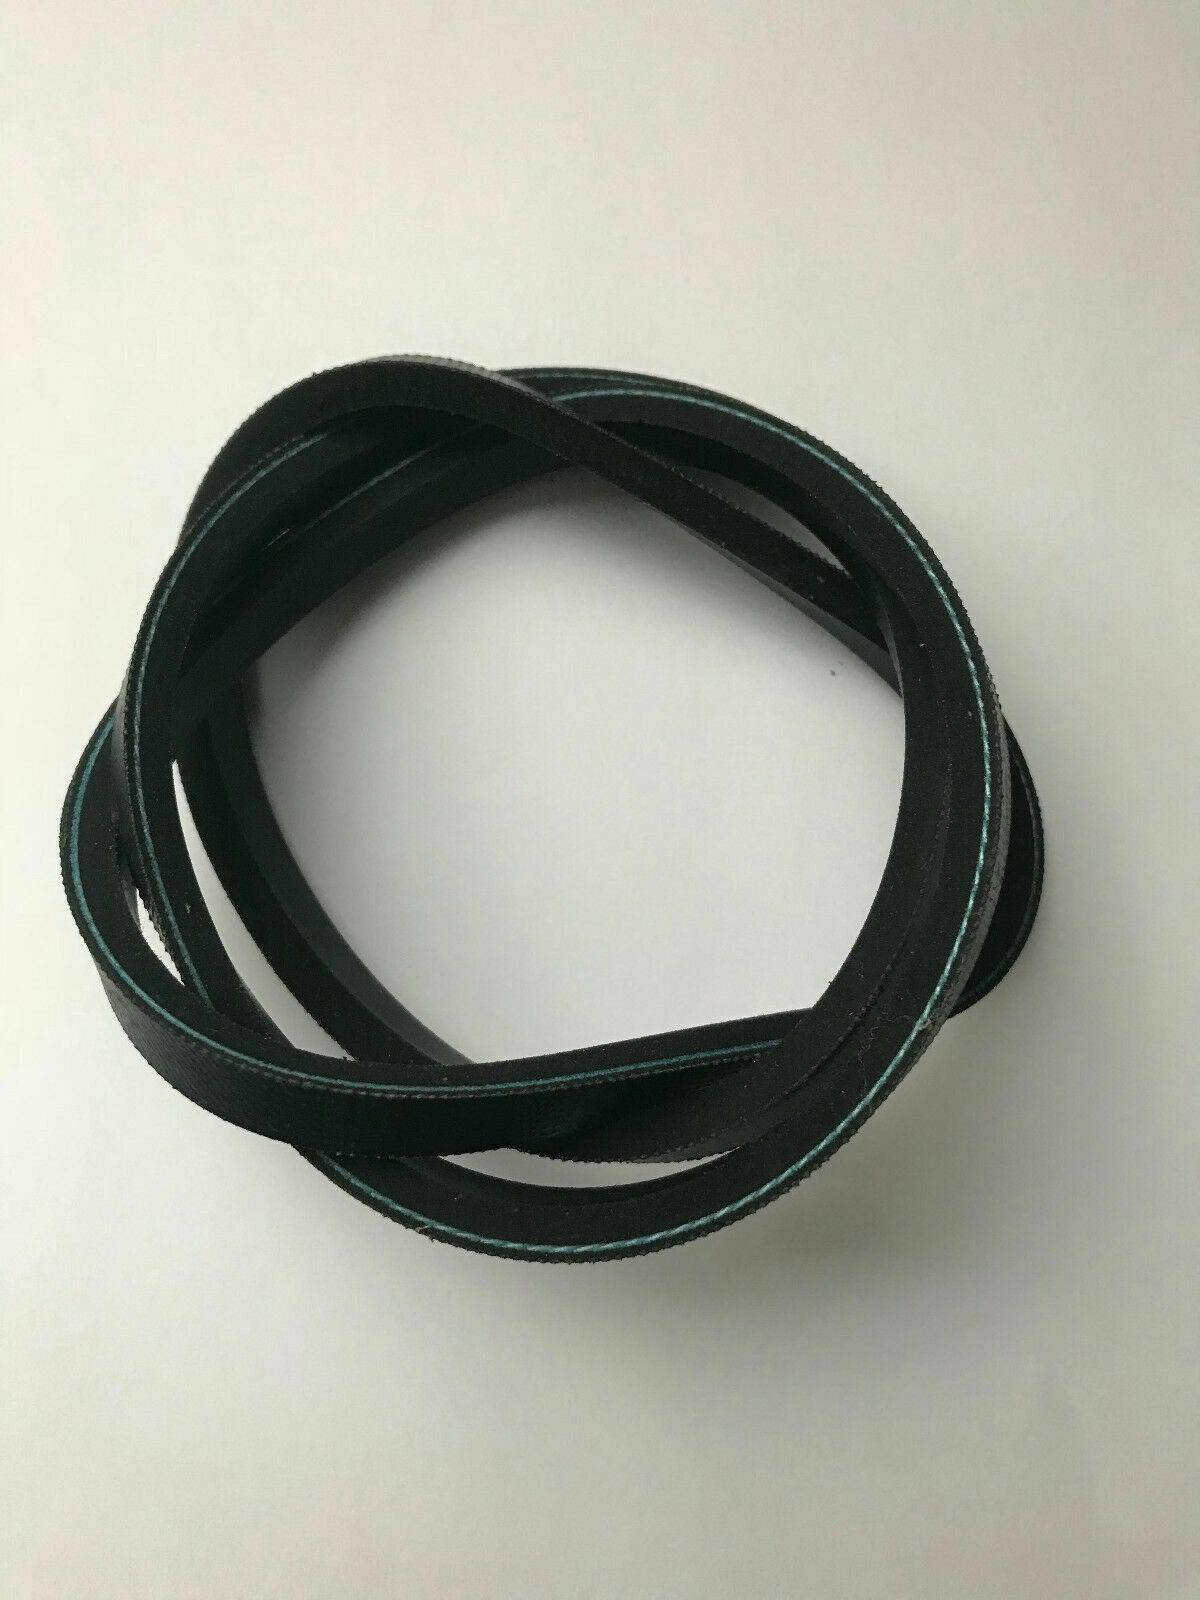 Primary image for New replacement belt for Delta 11-900 drill press 20.3cm/k26